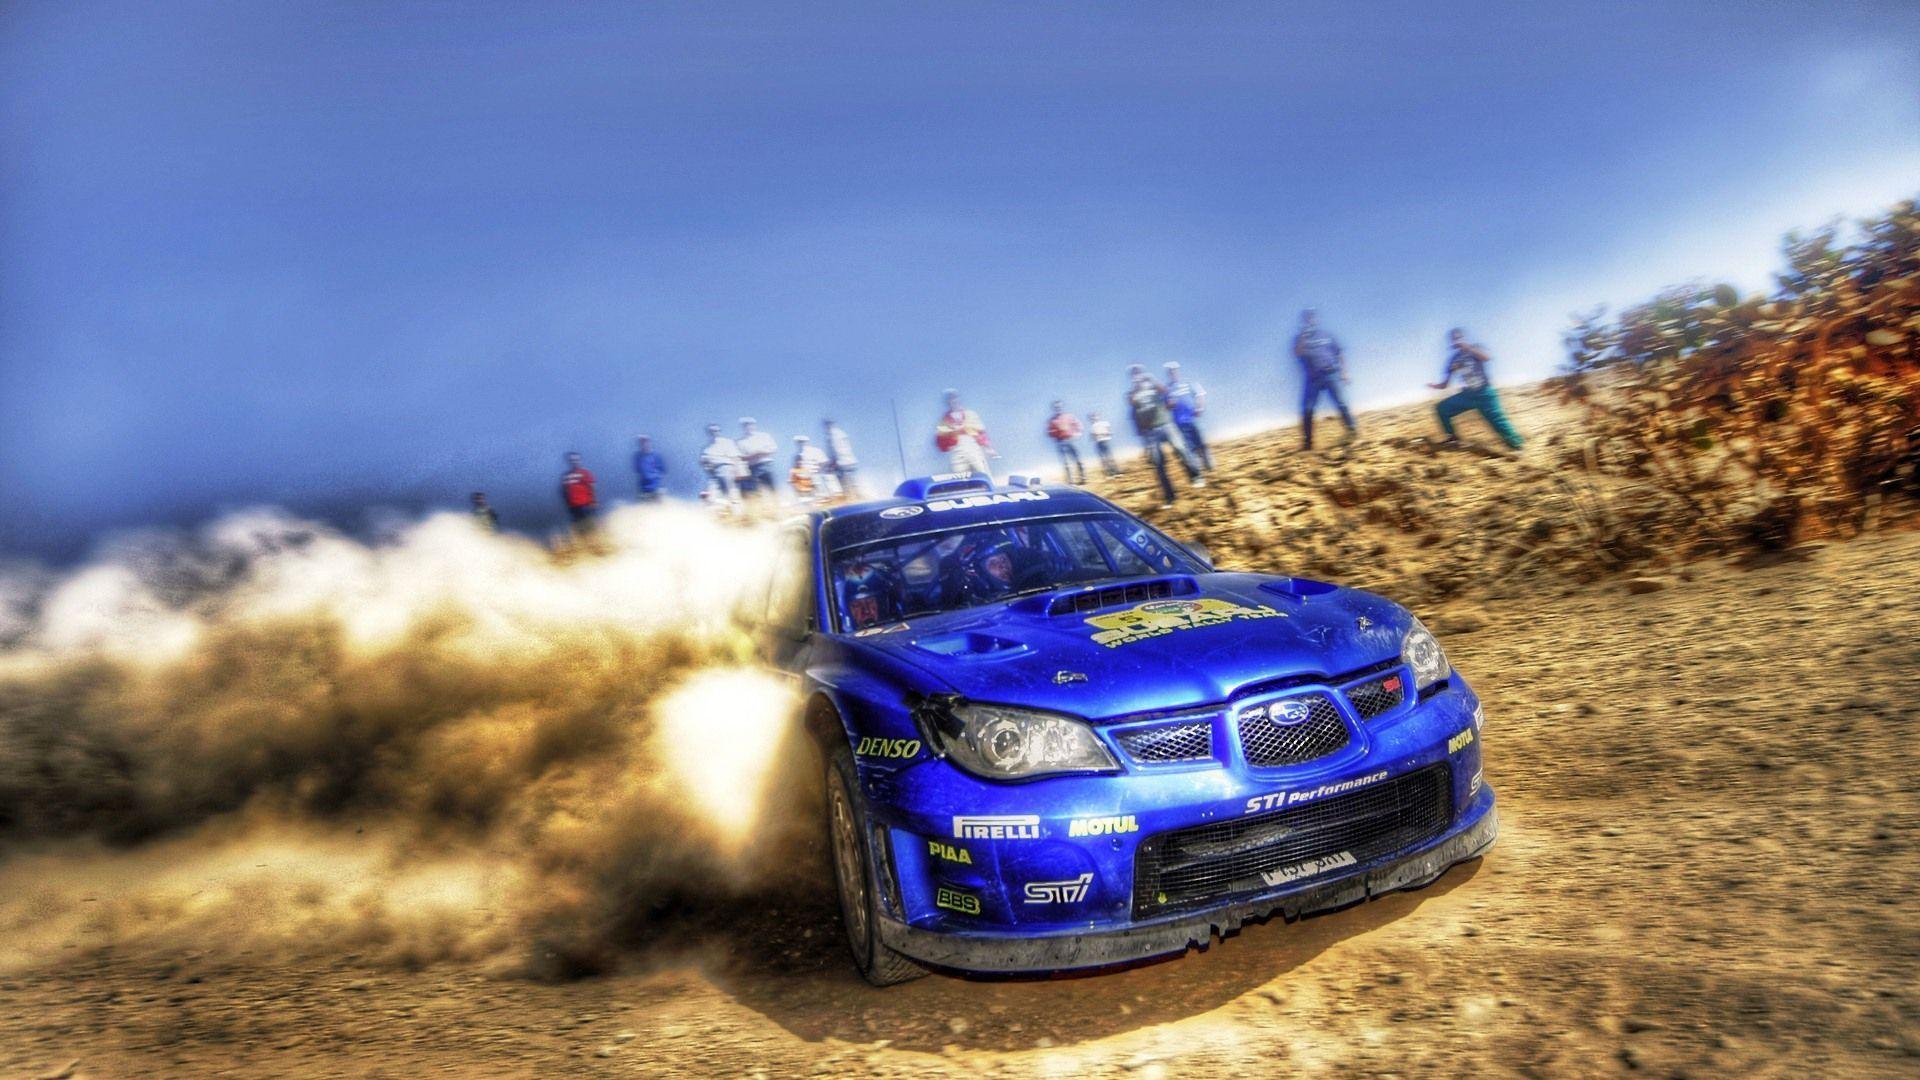 Download Amazing Rally Car Wallpaper 33289 1920x1080 px High